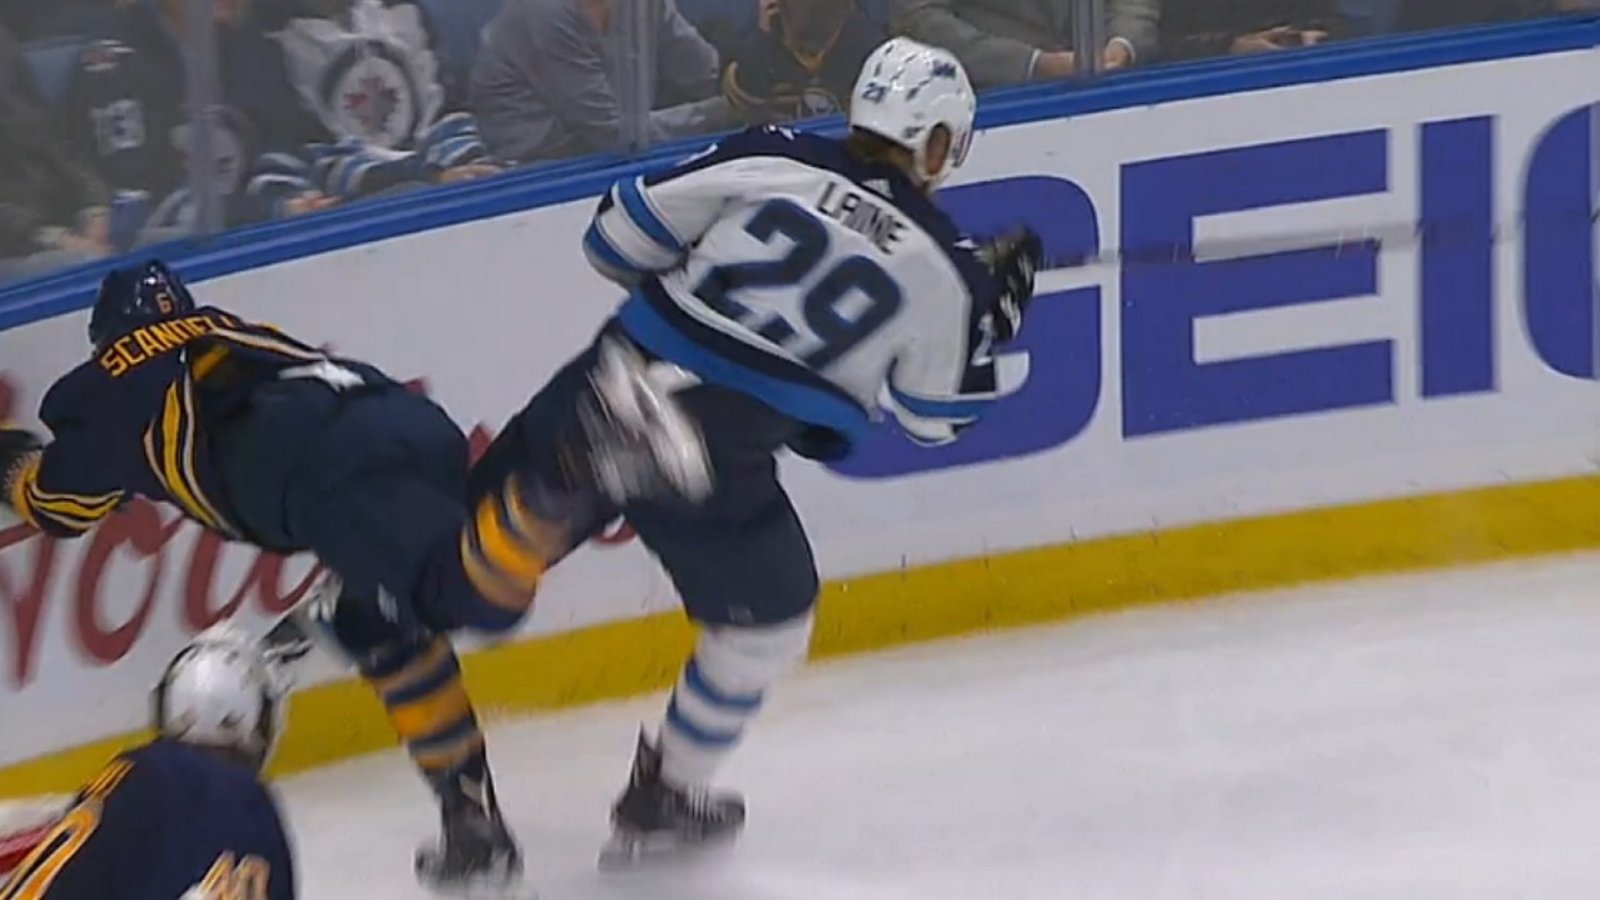 Huge hit from Laine sends player to the locker room. 